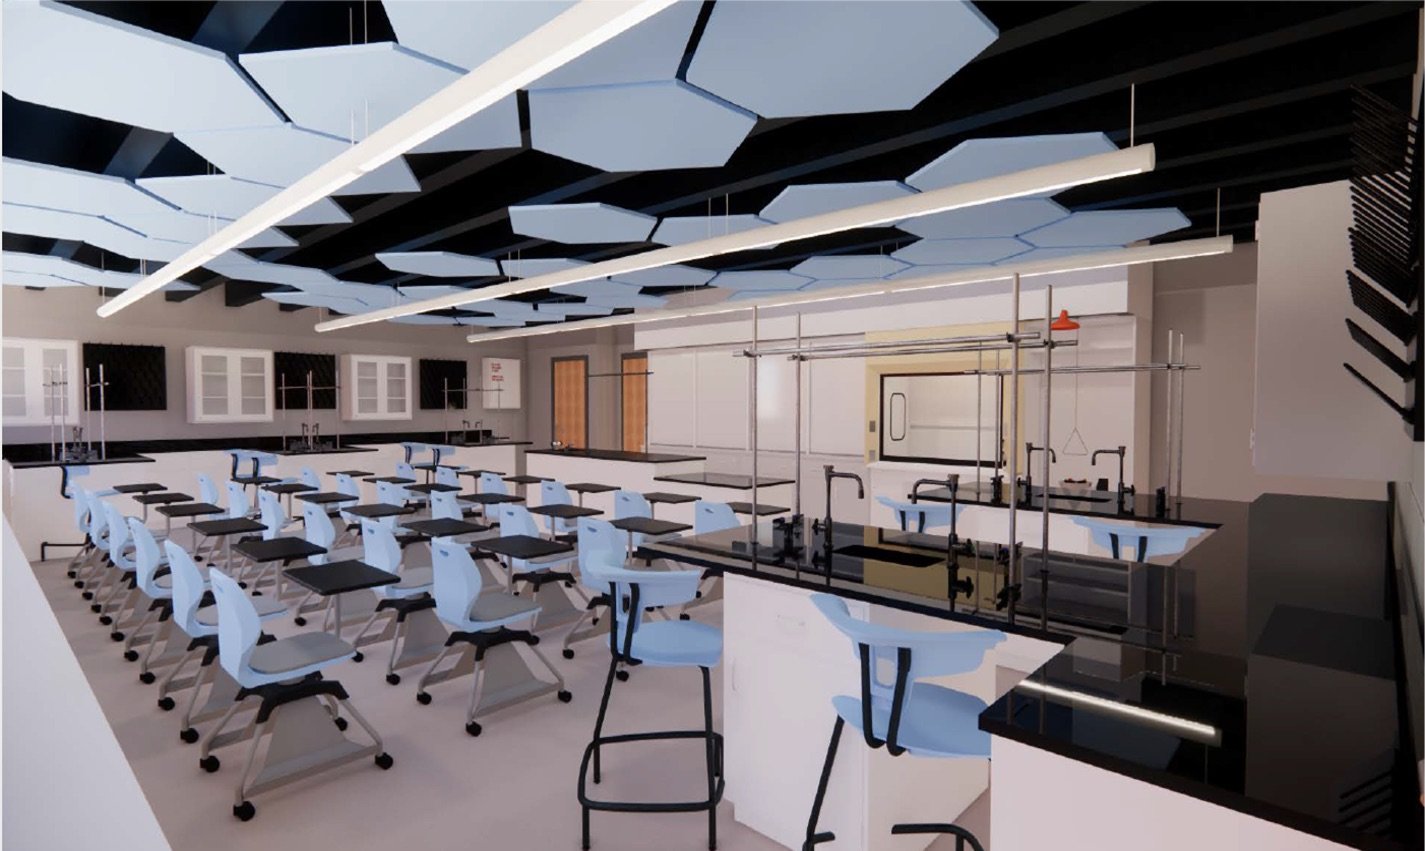 This rendering of the science lab is one design option the district may choose.